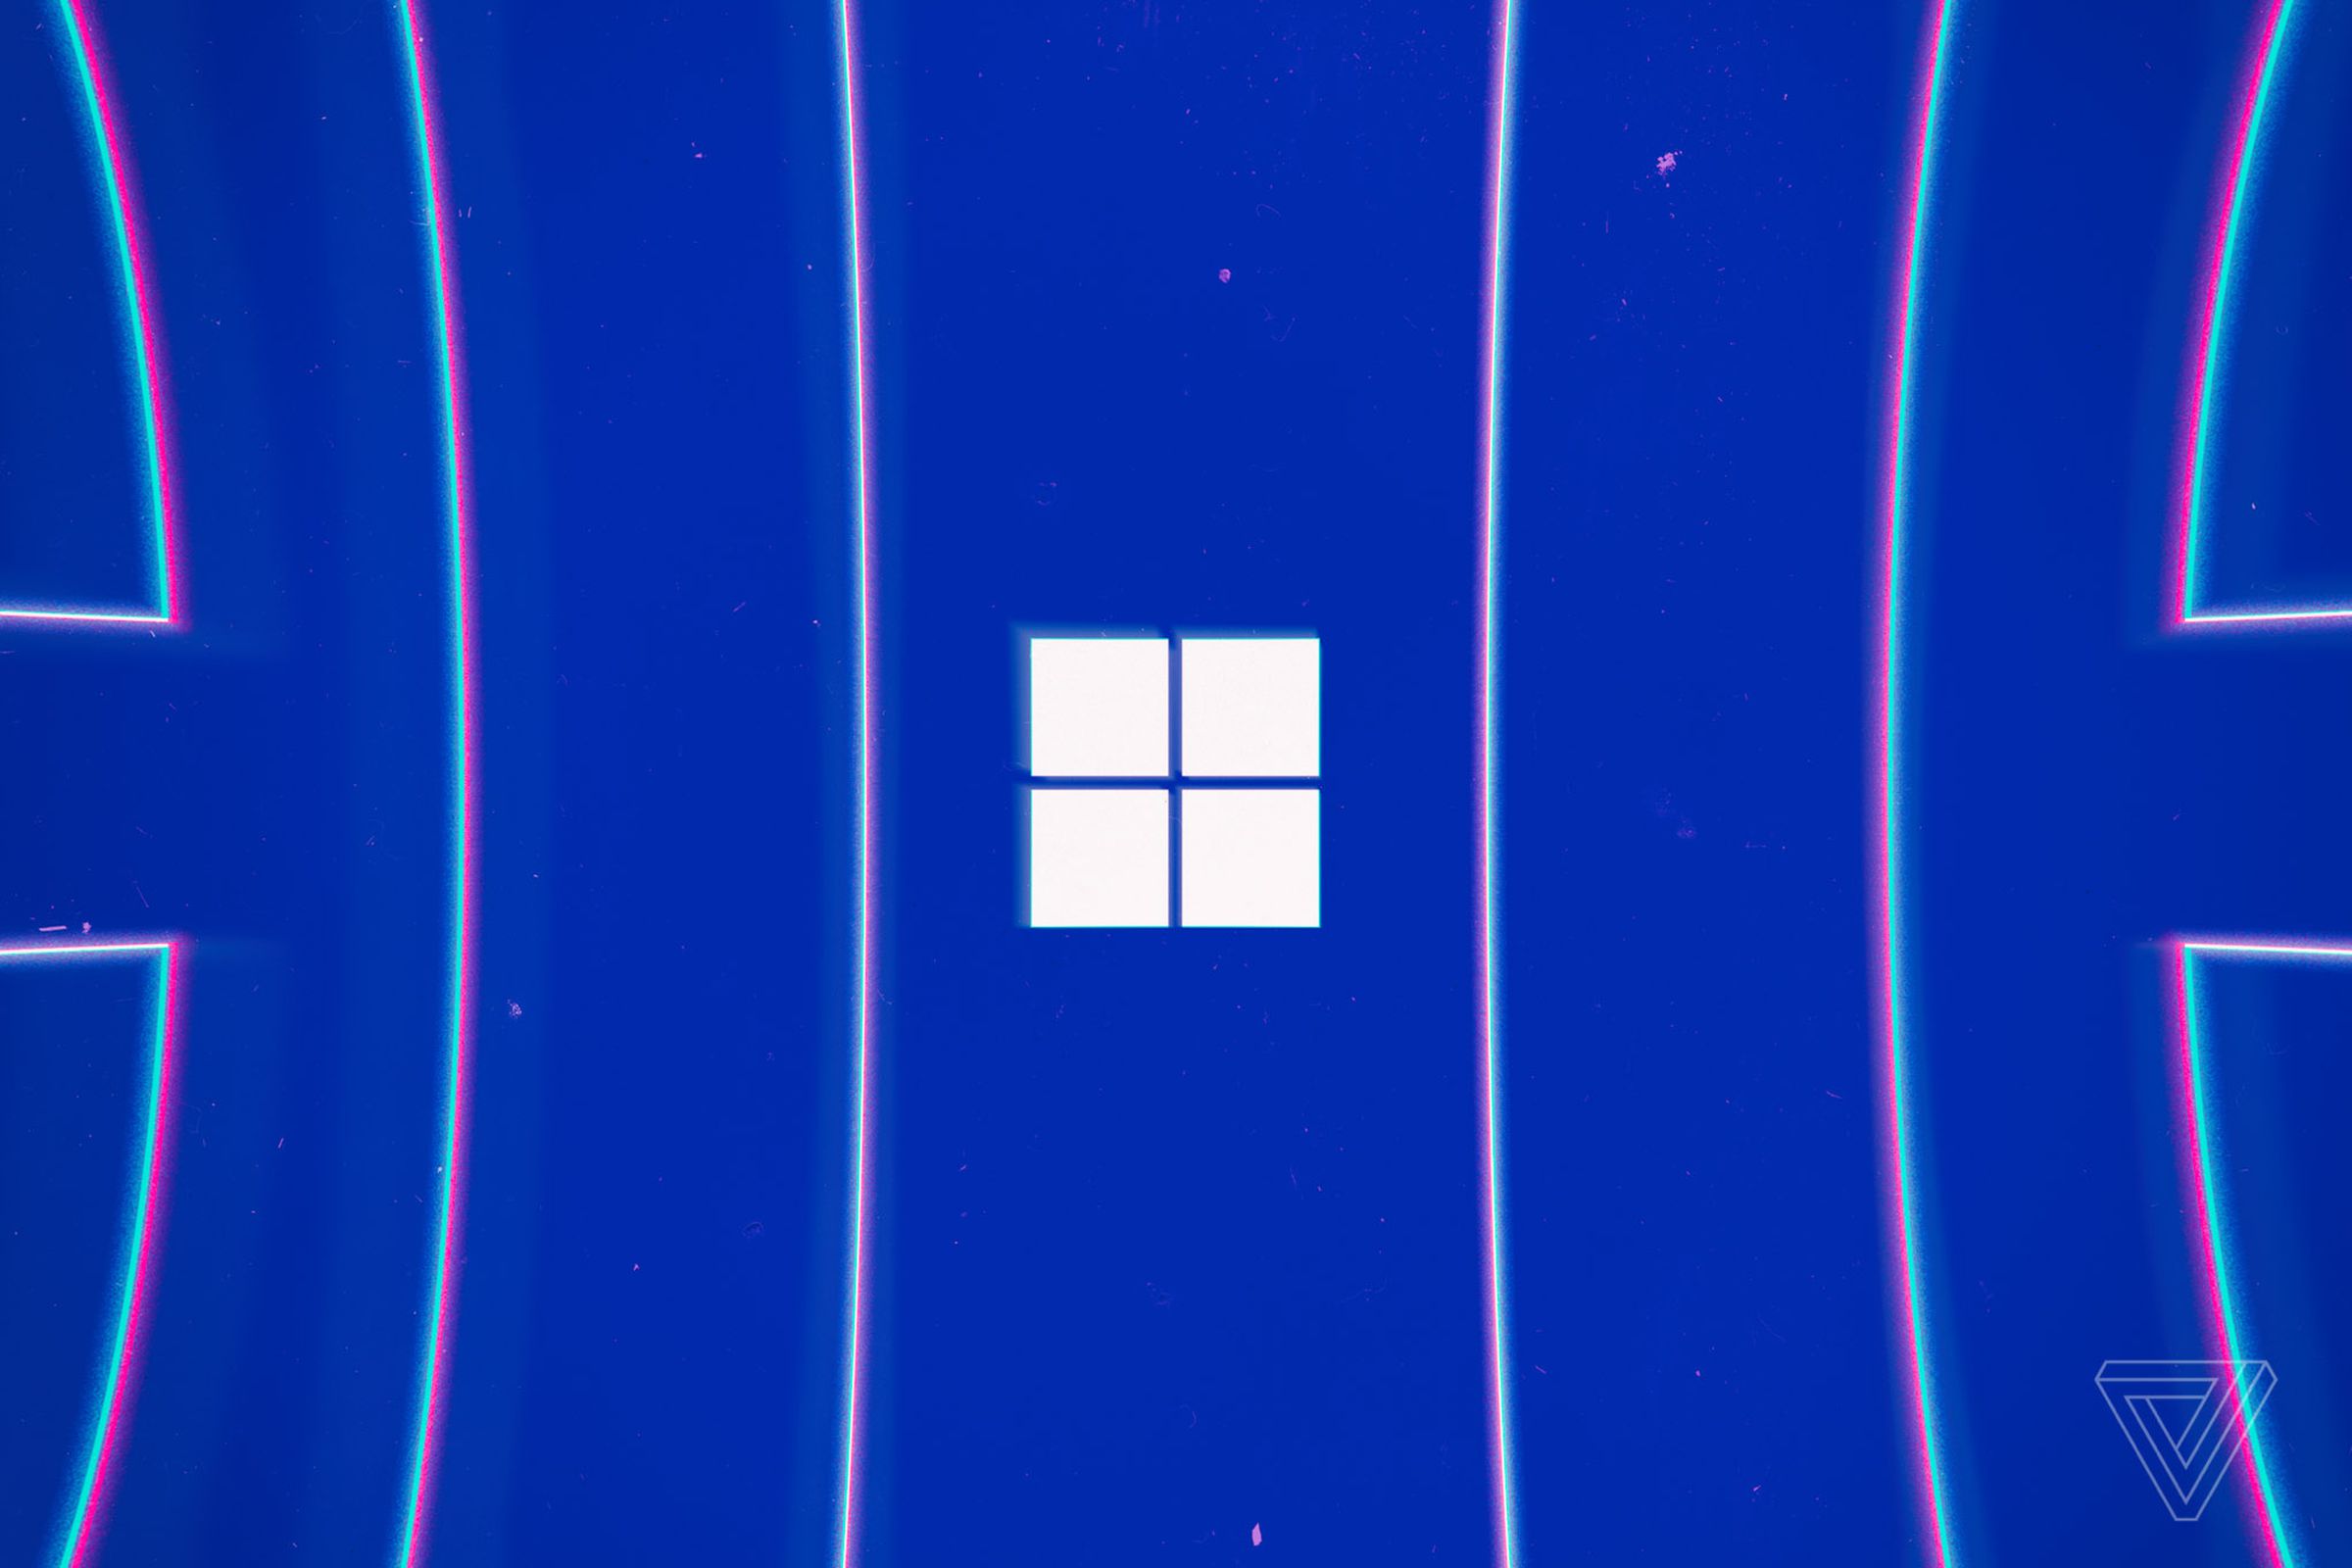 Windows logo on a blue background with several vertical lines flanking it.